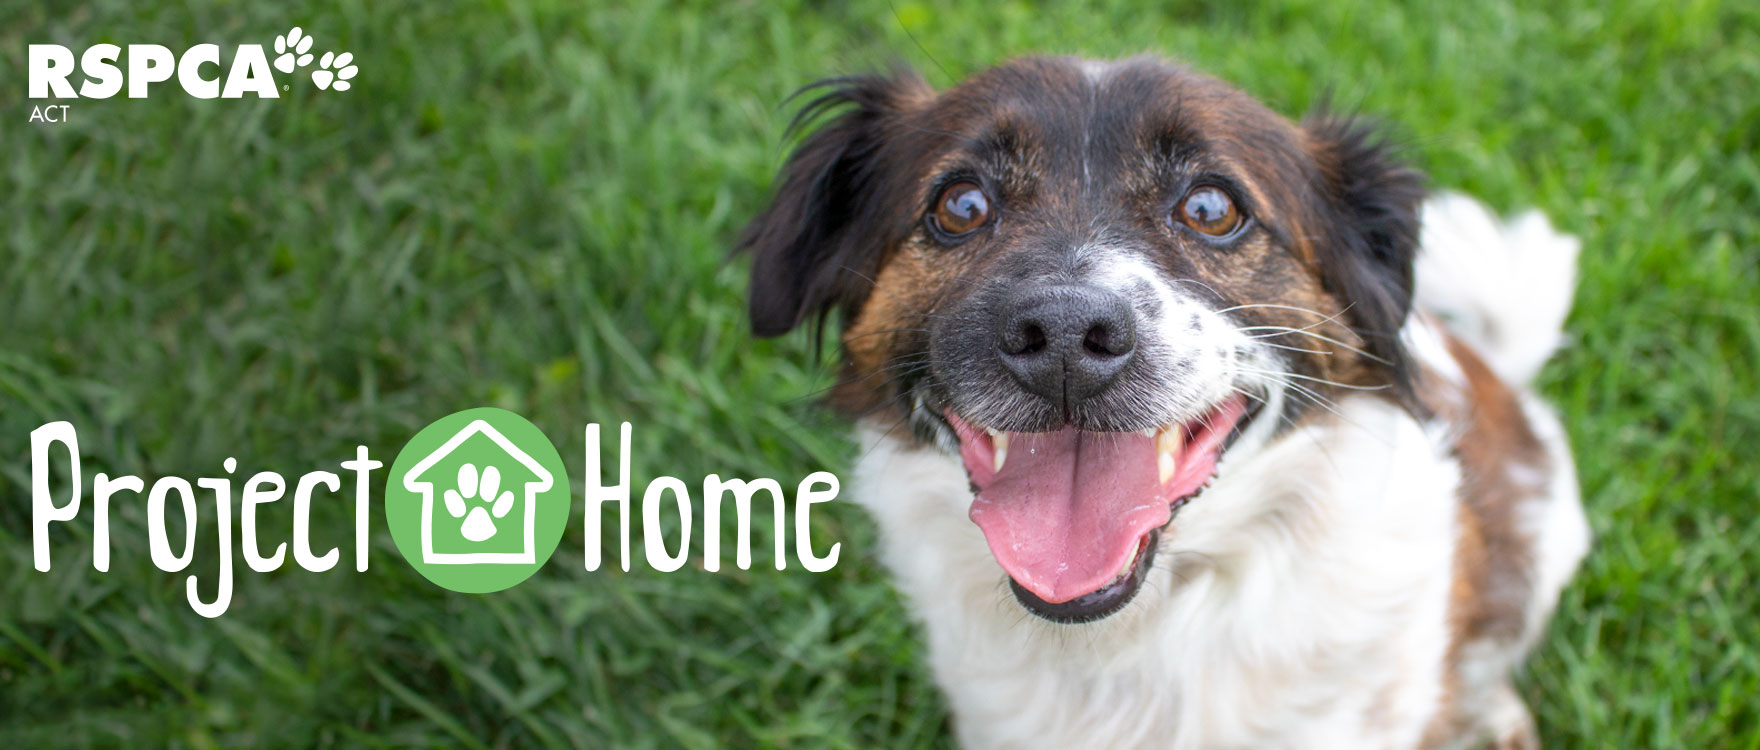 Project Home | RSPCA ACT